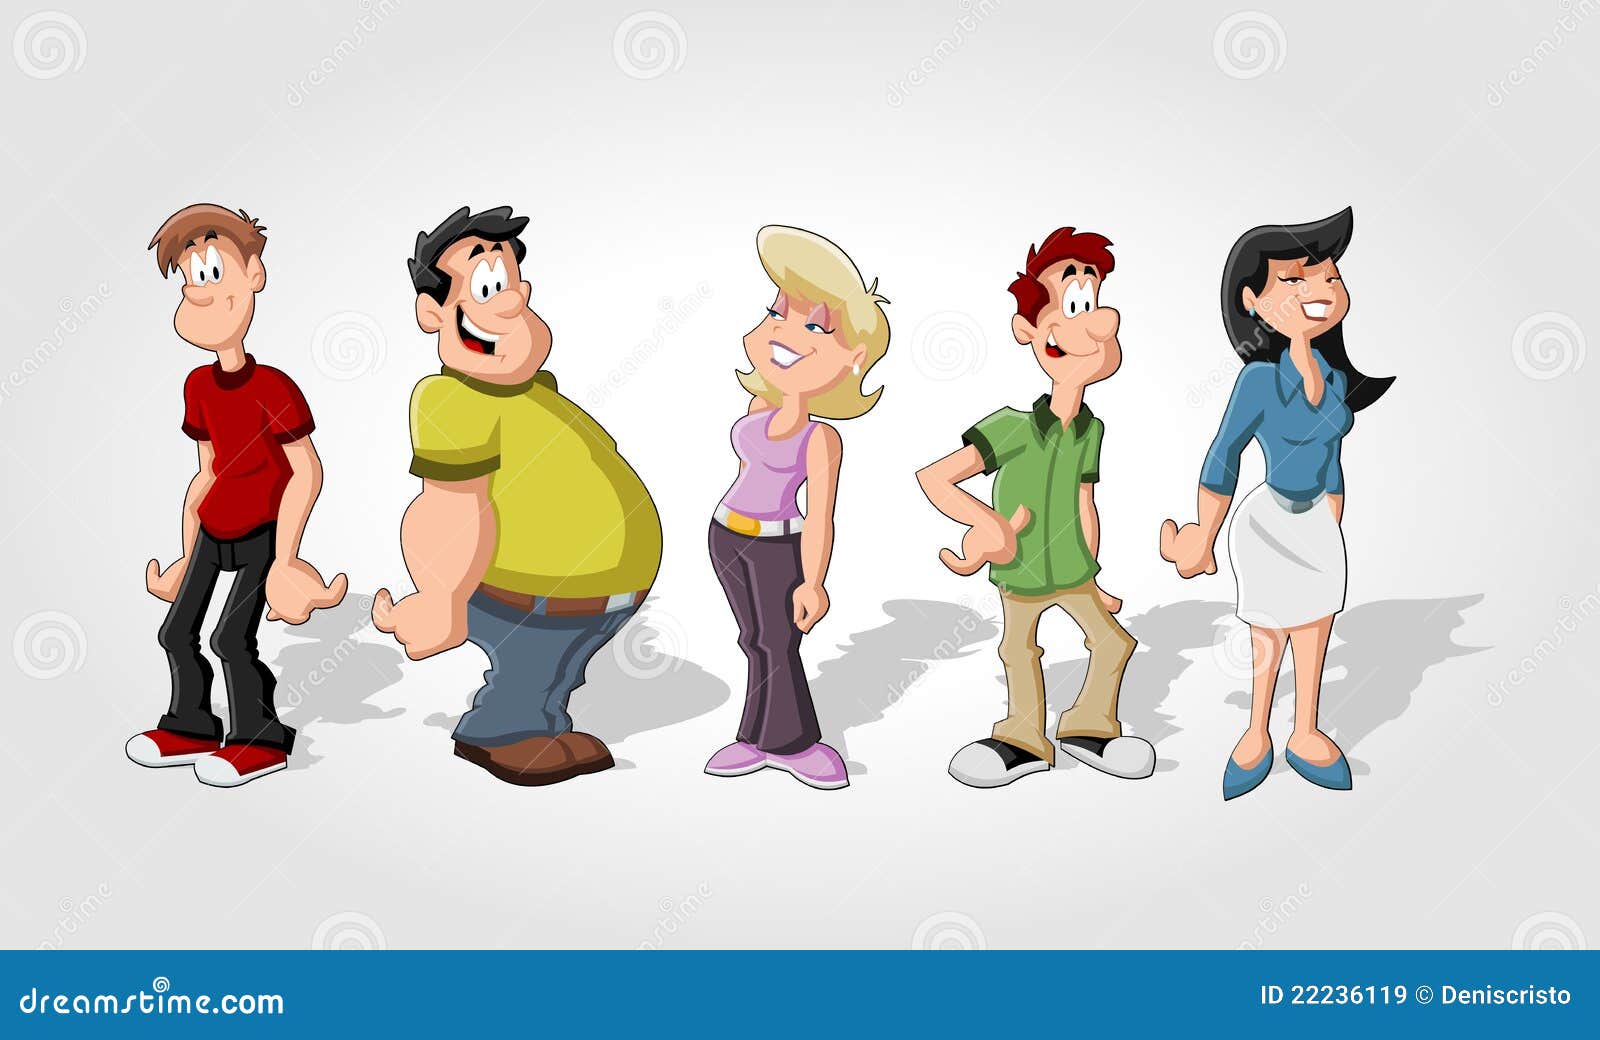 Group of cartoon people stock vector. Illustration of profession - 22236119